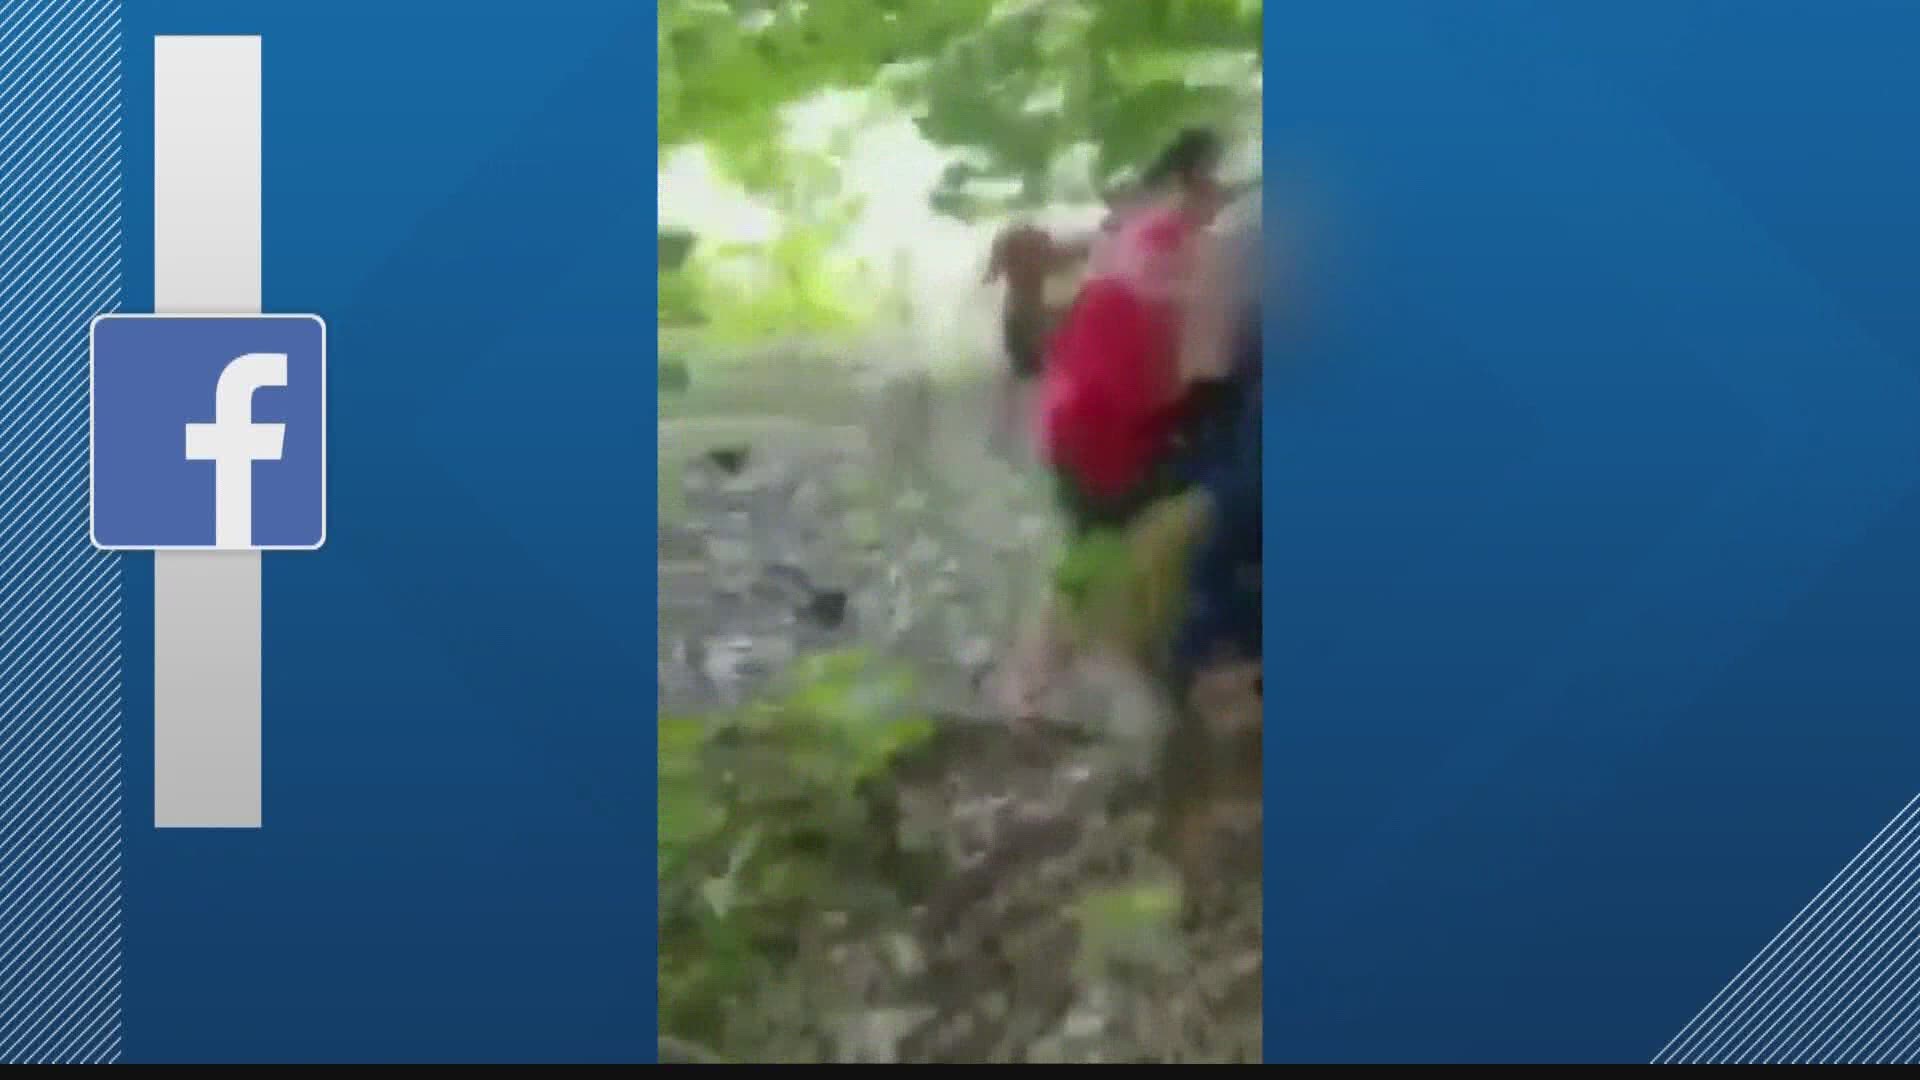 The Monroe County Prosecutor has filed charges against two men for an incident on July 4 near Lake Monroe.